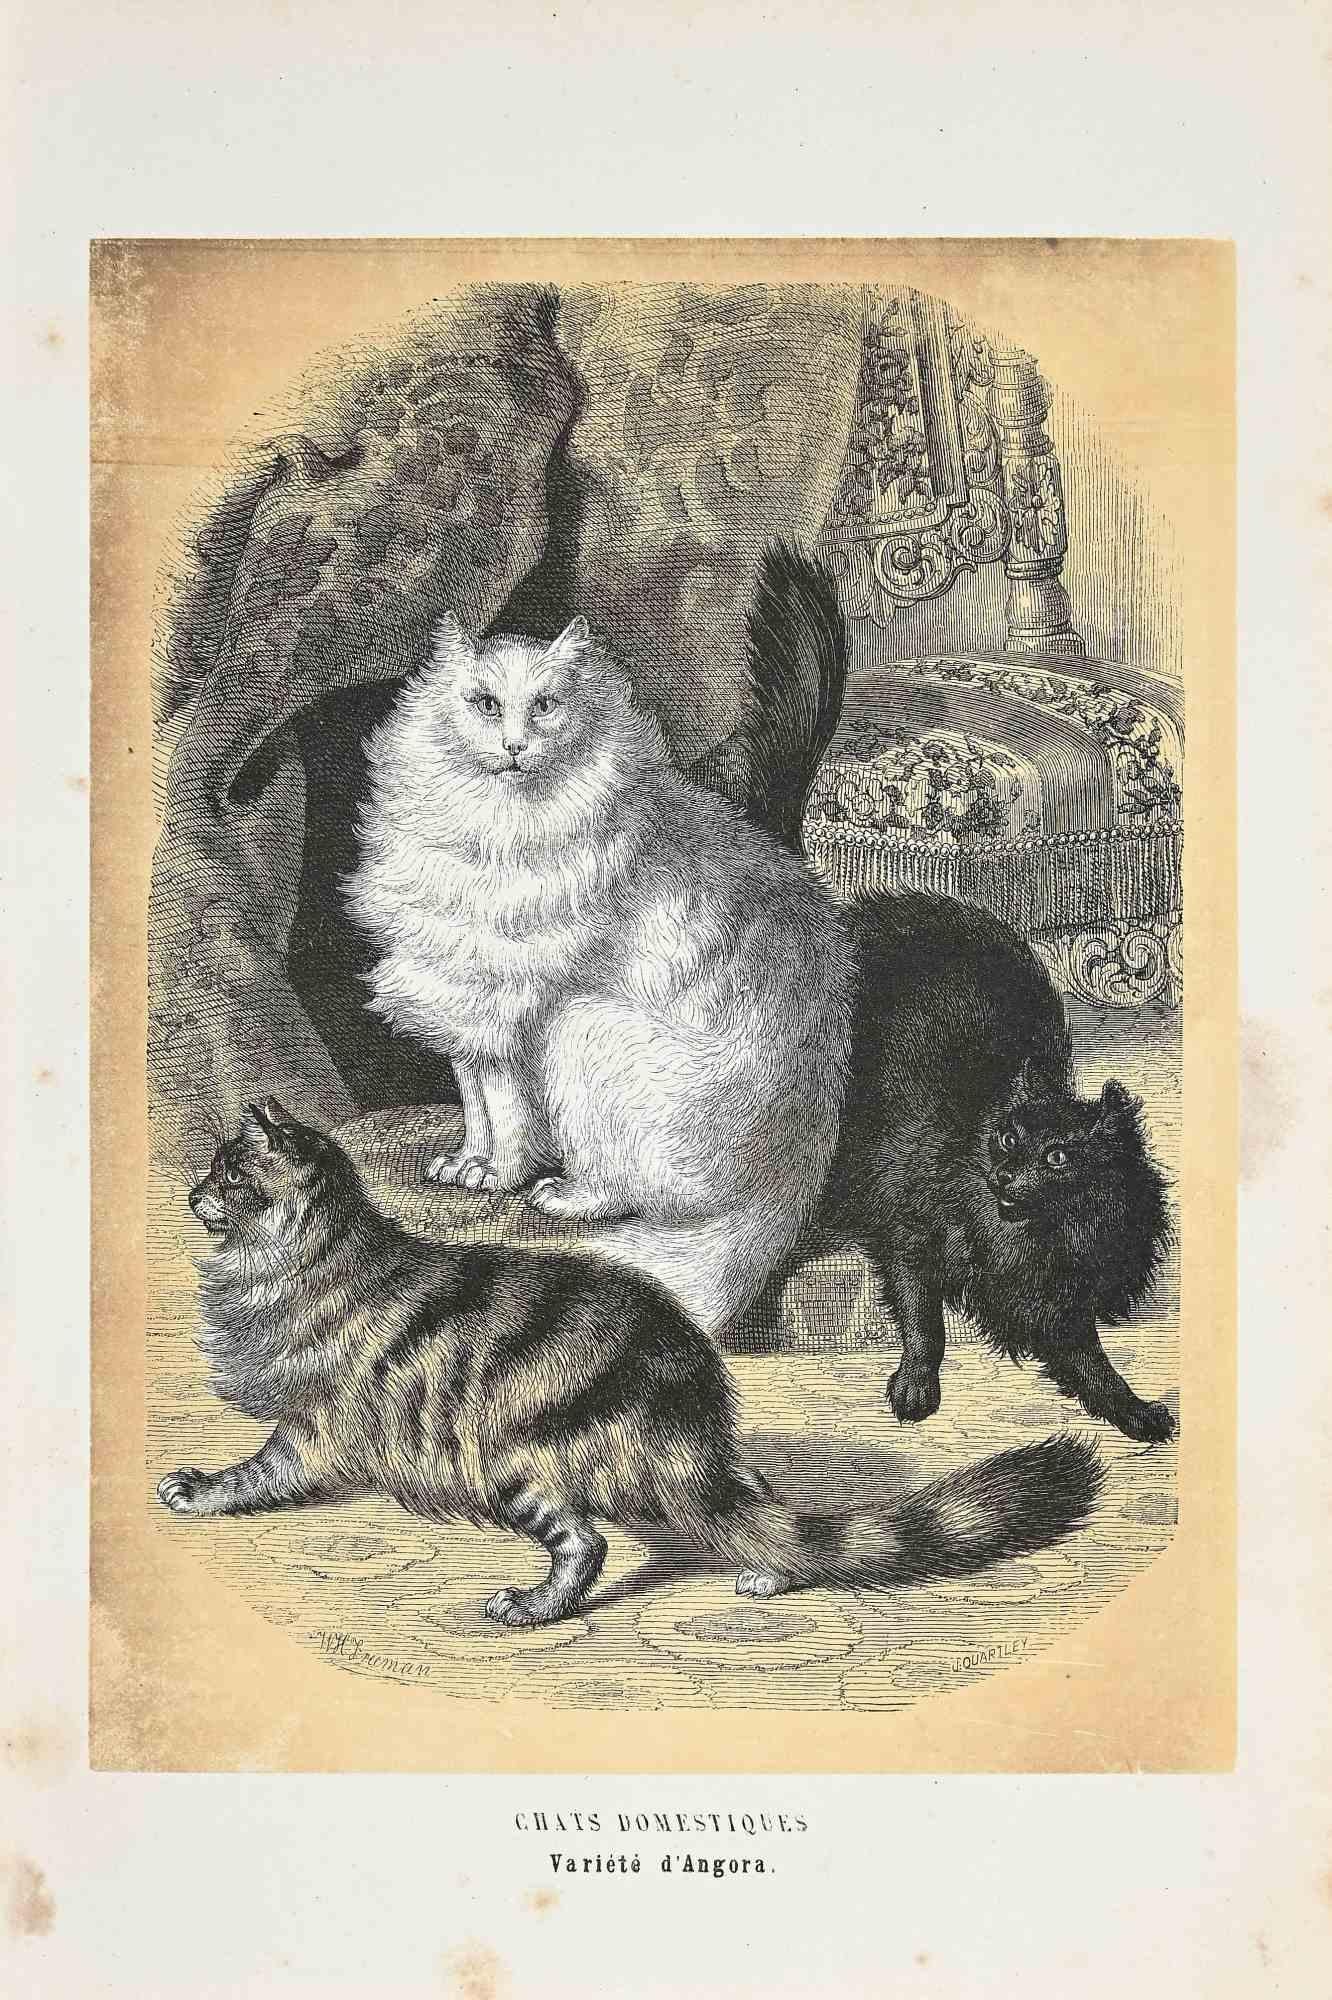 Domestic Cats is an original lithograph on ivory-colored paper, realized by Paul Gervais (1816-1879). The artwork is from The Series of "Les Trois Règnes de la Nature", and was published in 1854.

Good conditions except for some fixings.

Titled on